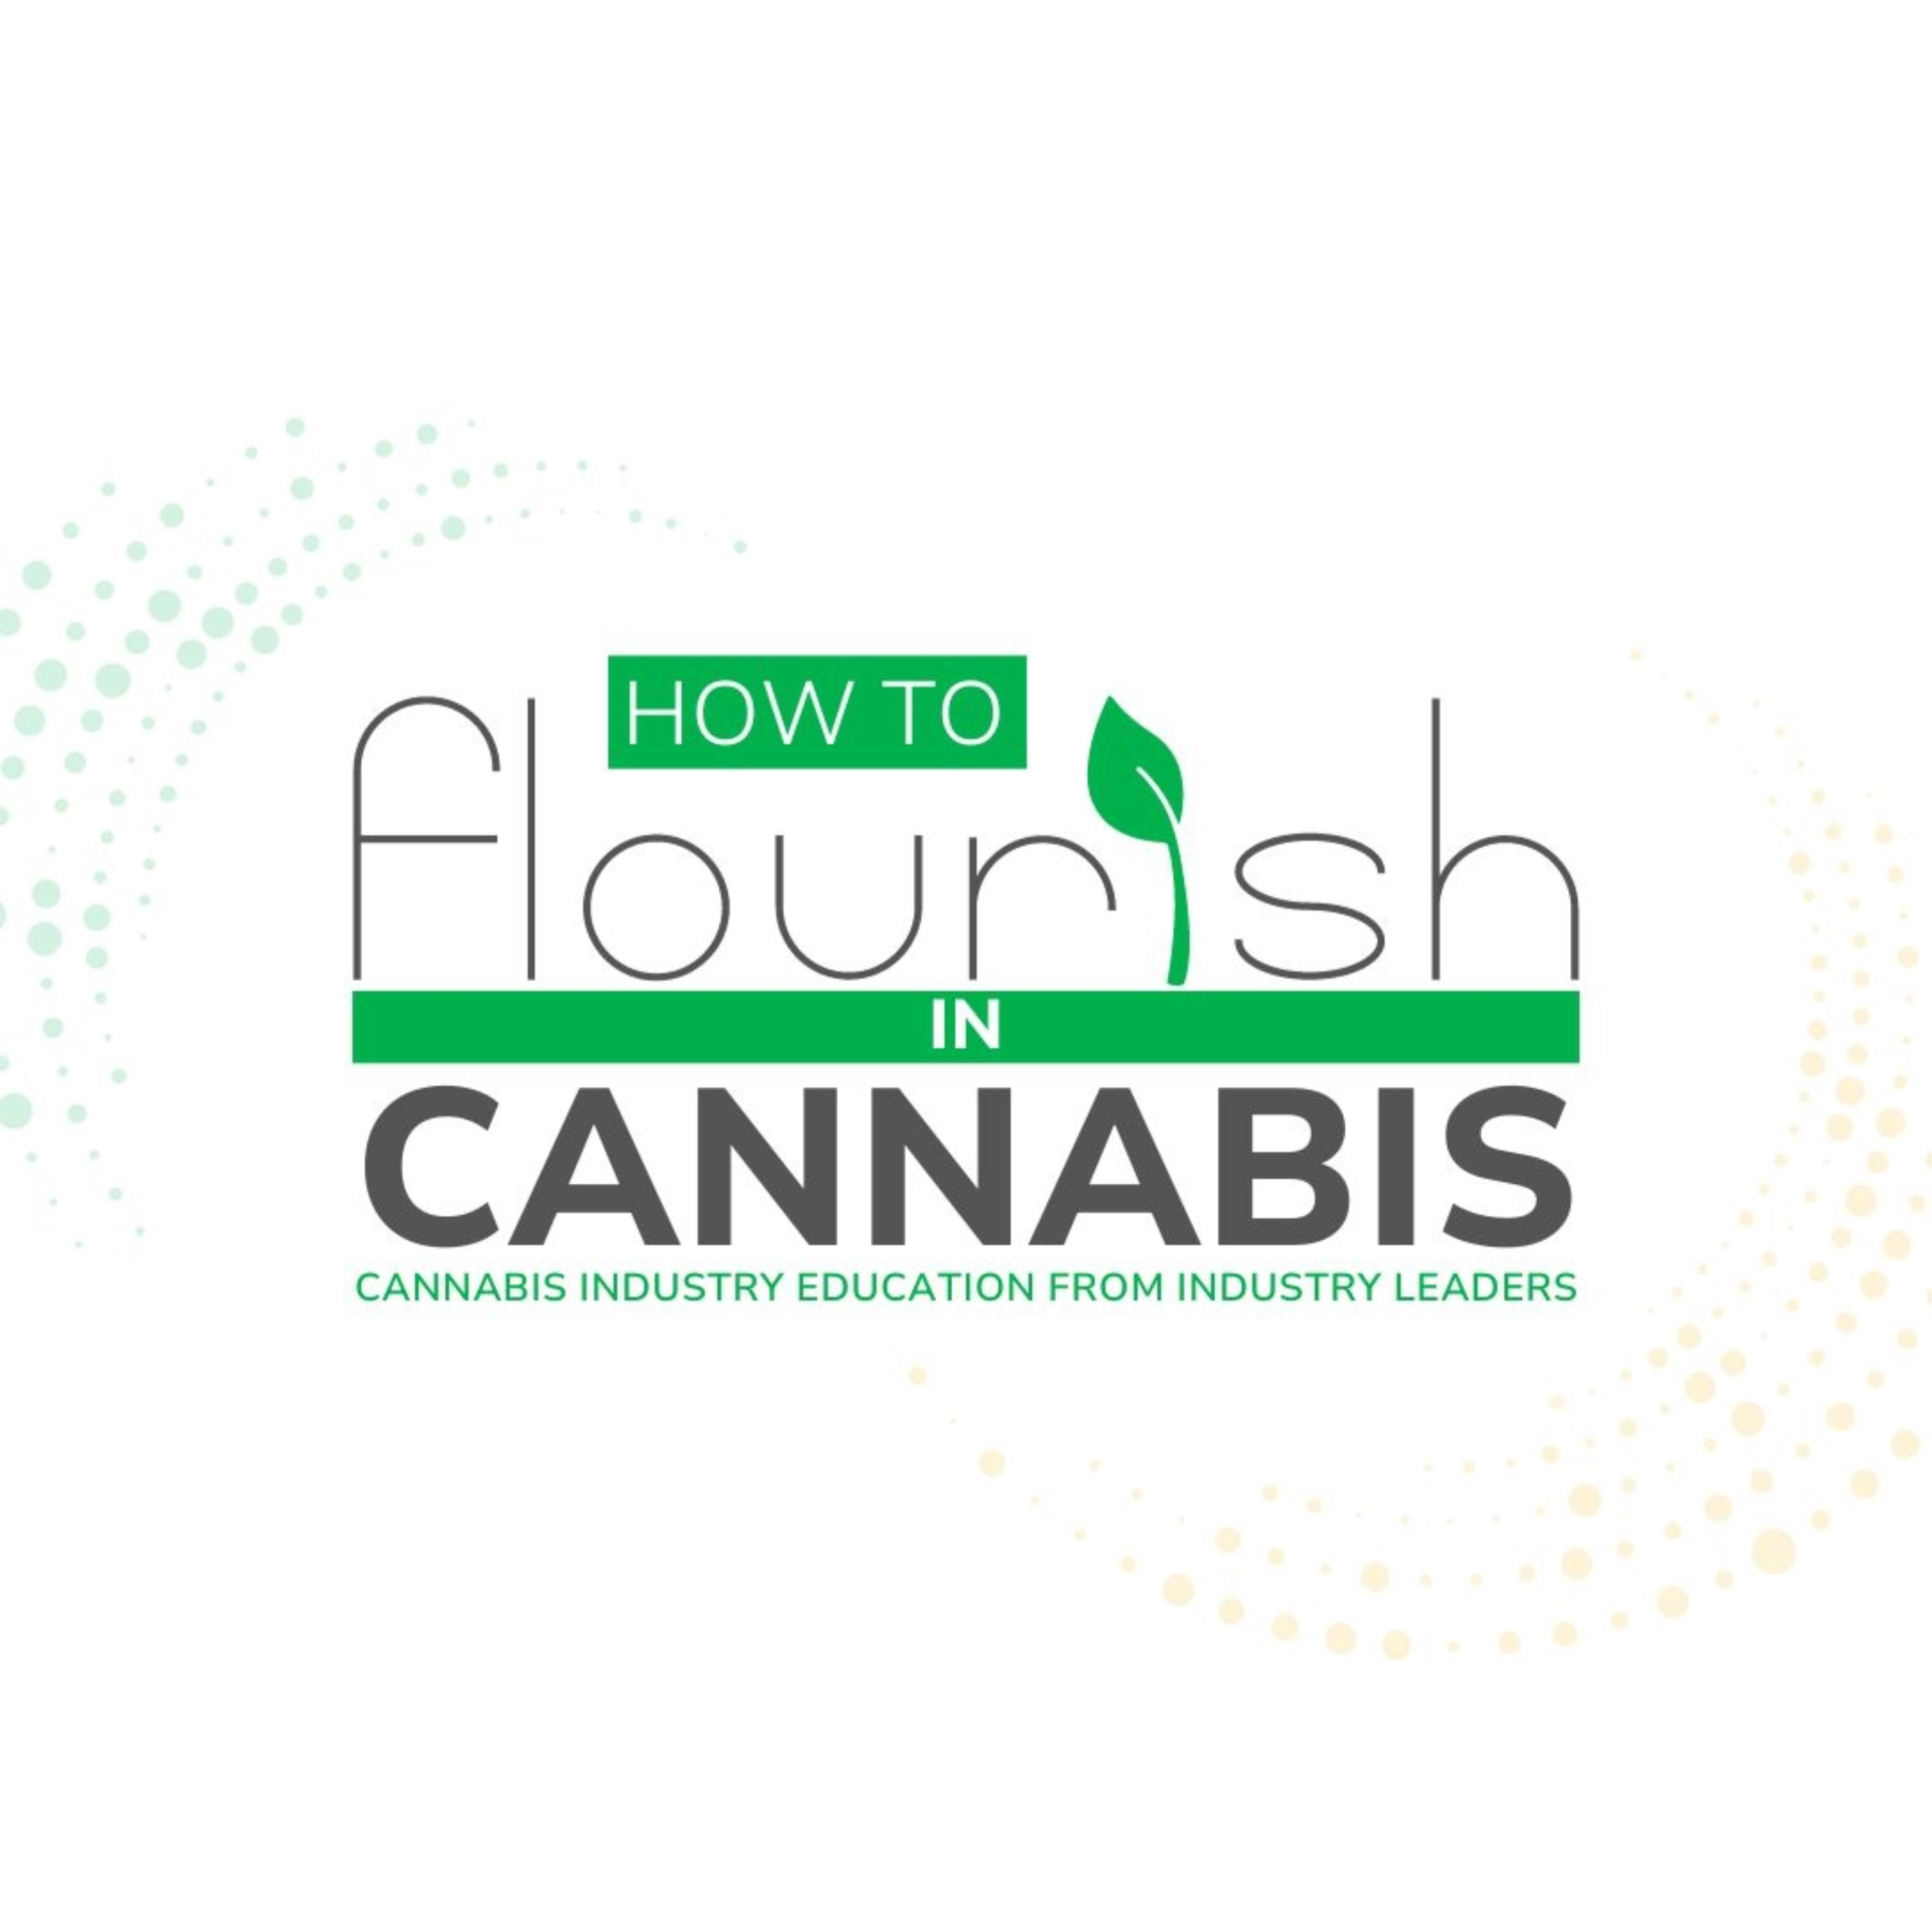 Artwork for How to Flourish in Cannabis